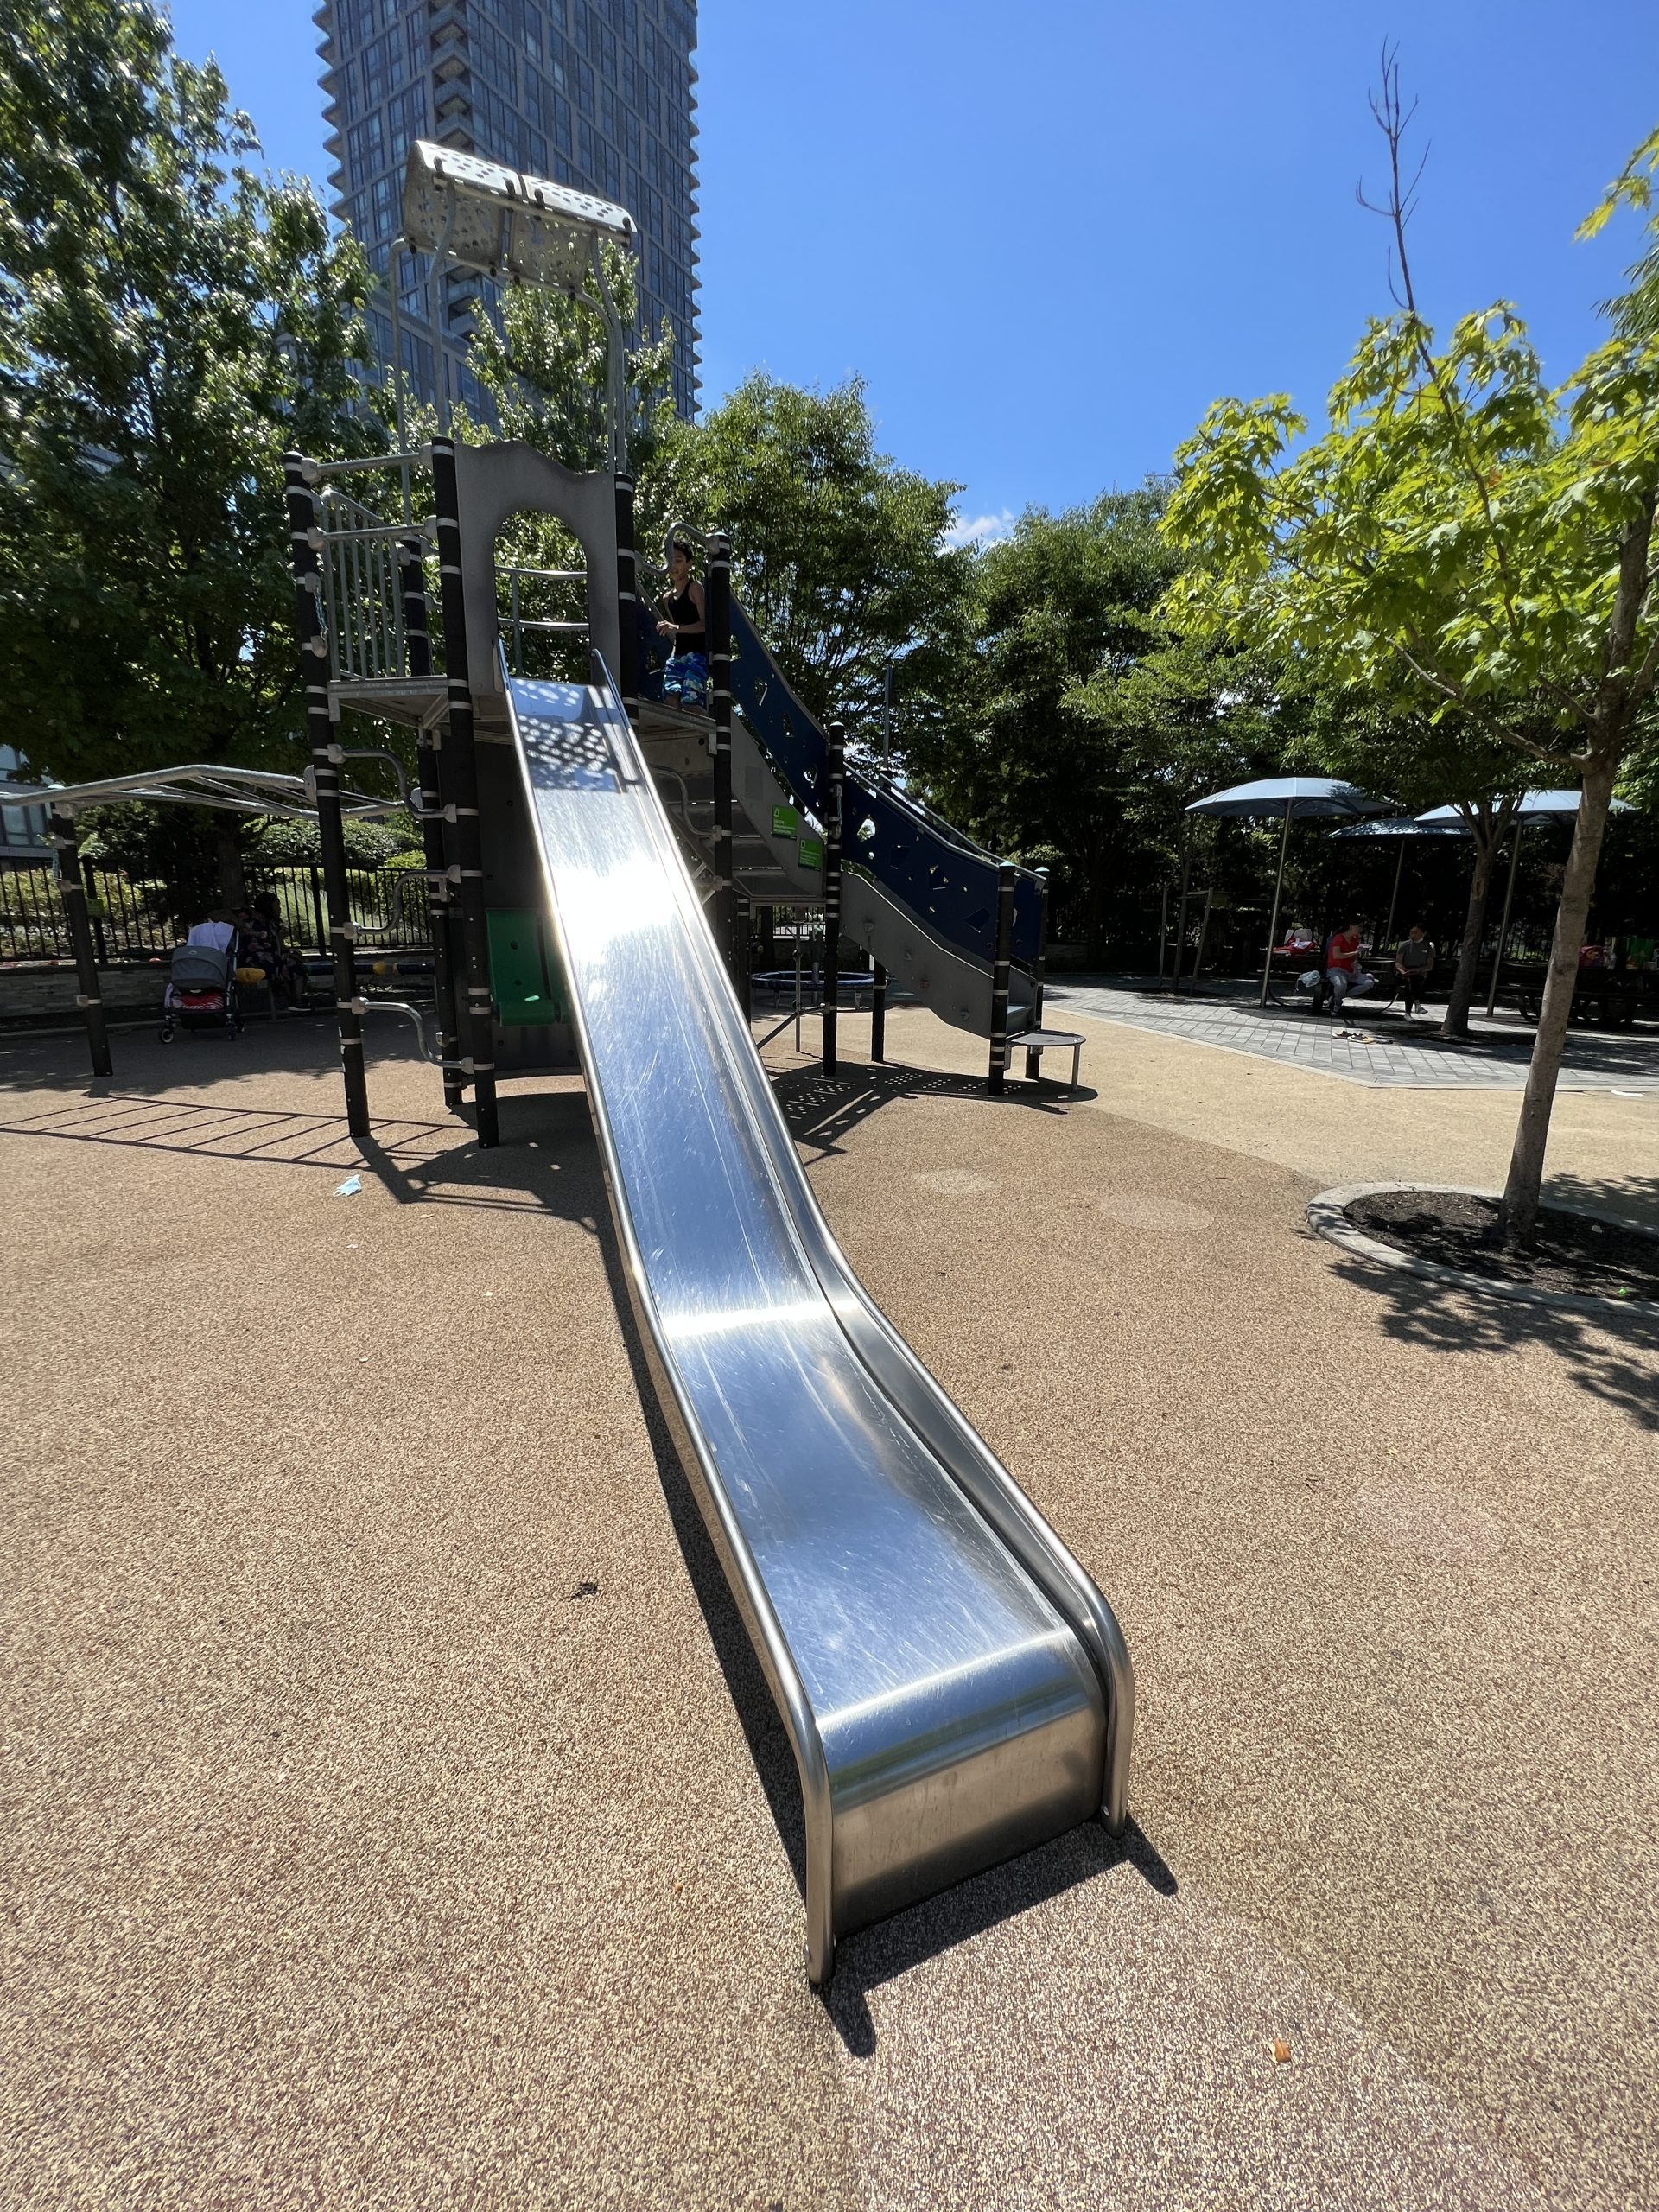 SLIDE - long straight metal slide at climbing wall tower AT Newport Green Park Playground in Jersey City NJ